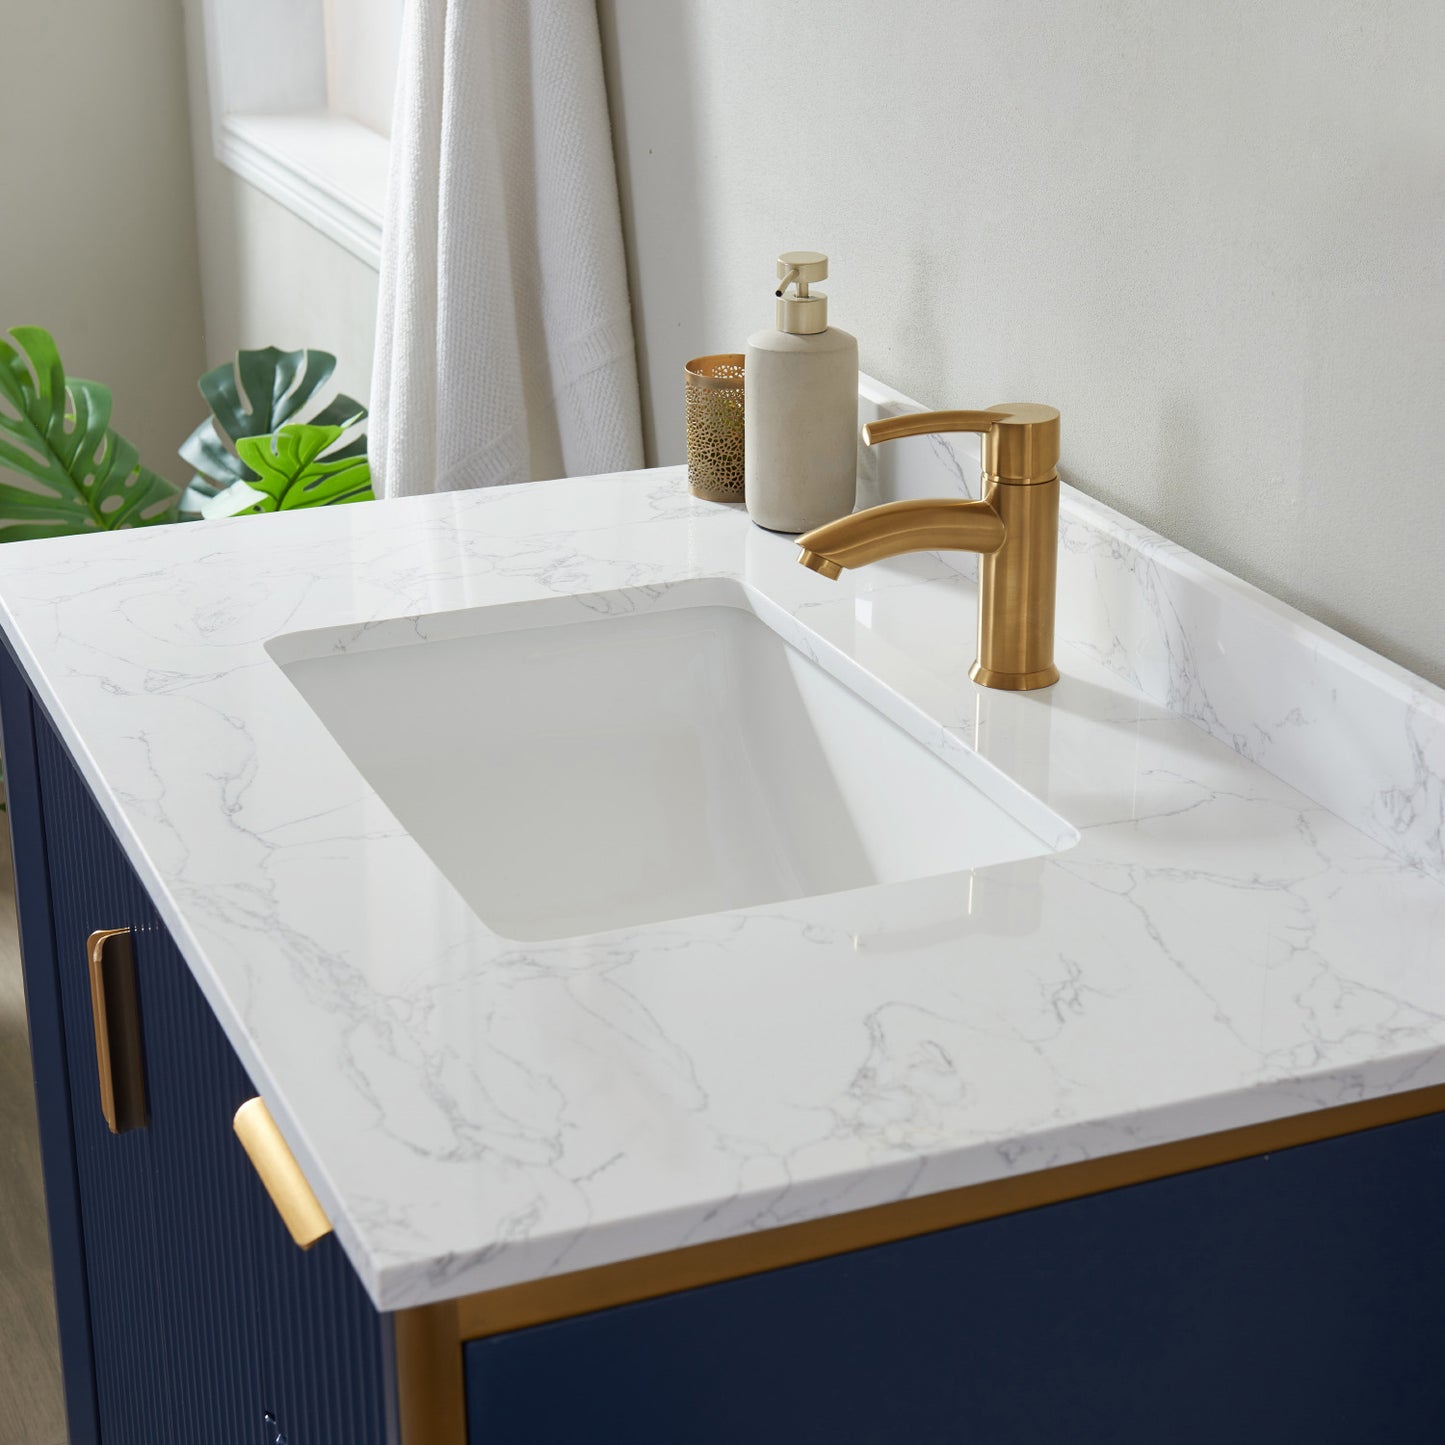 Granada 36" Vanity in Royal Blue with White Composite Grain Stone Countertop Without Mirror